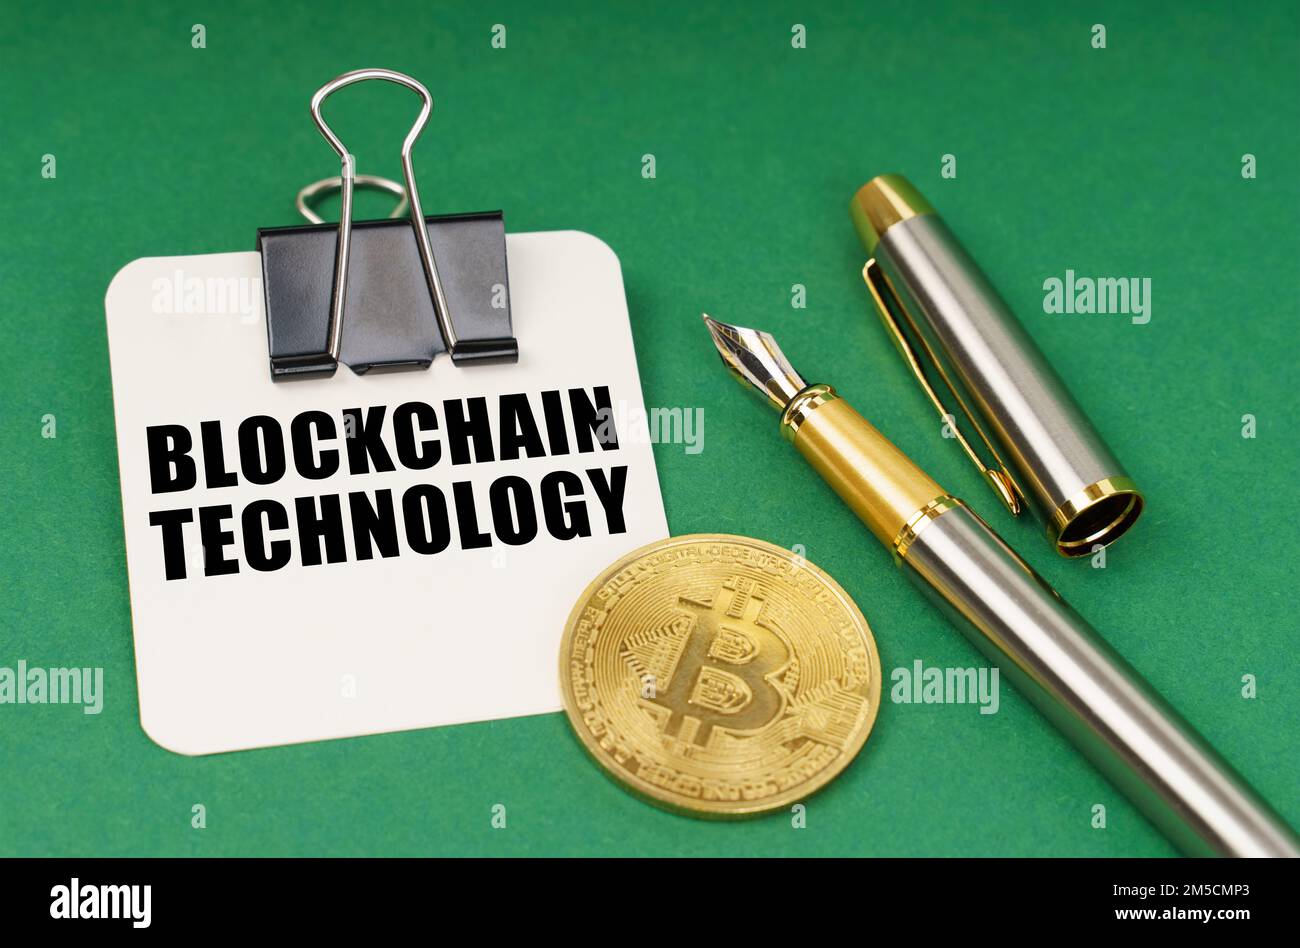 Cryptocurrency and business concept. On a green surface, a bitcoin coin, a pen and a sheet of paper with the inscription - Blockchain technology Stock Photo